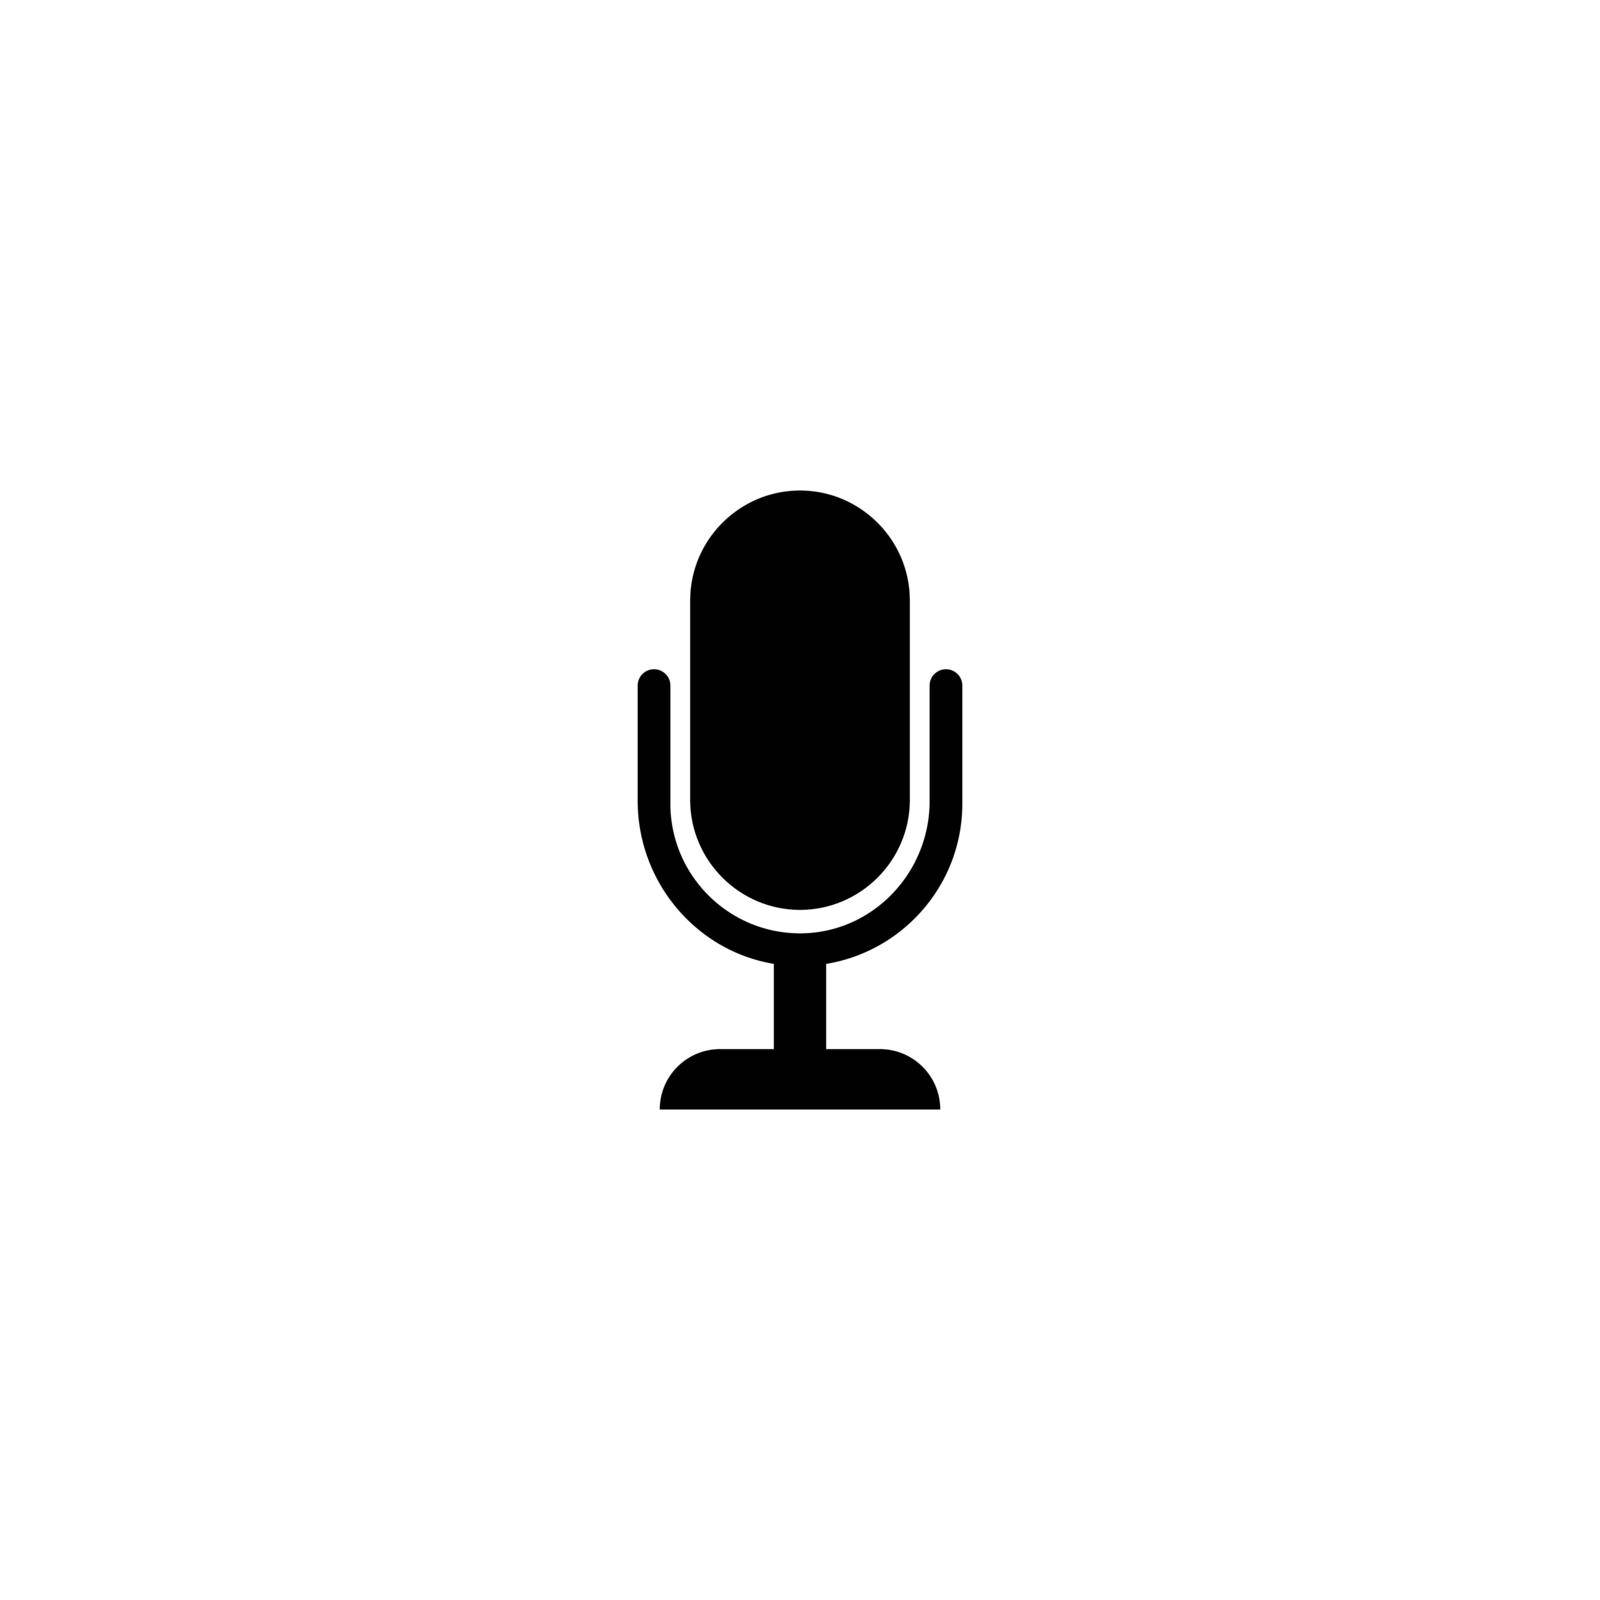 Microphone Flat Vector Icon by sfinks